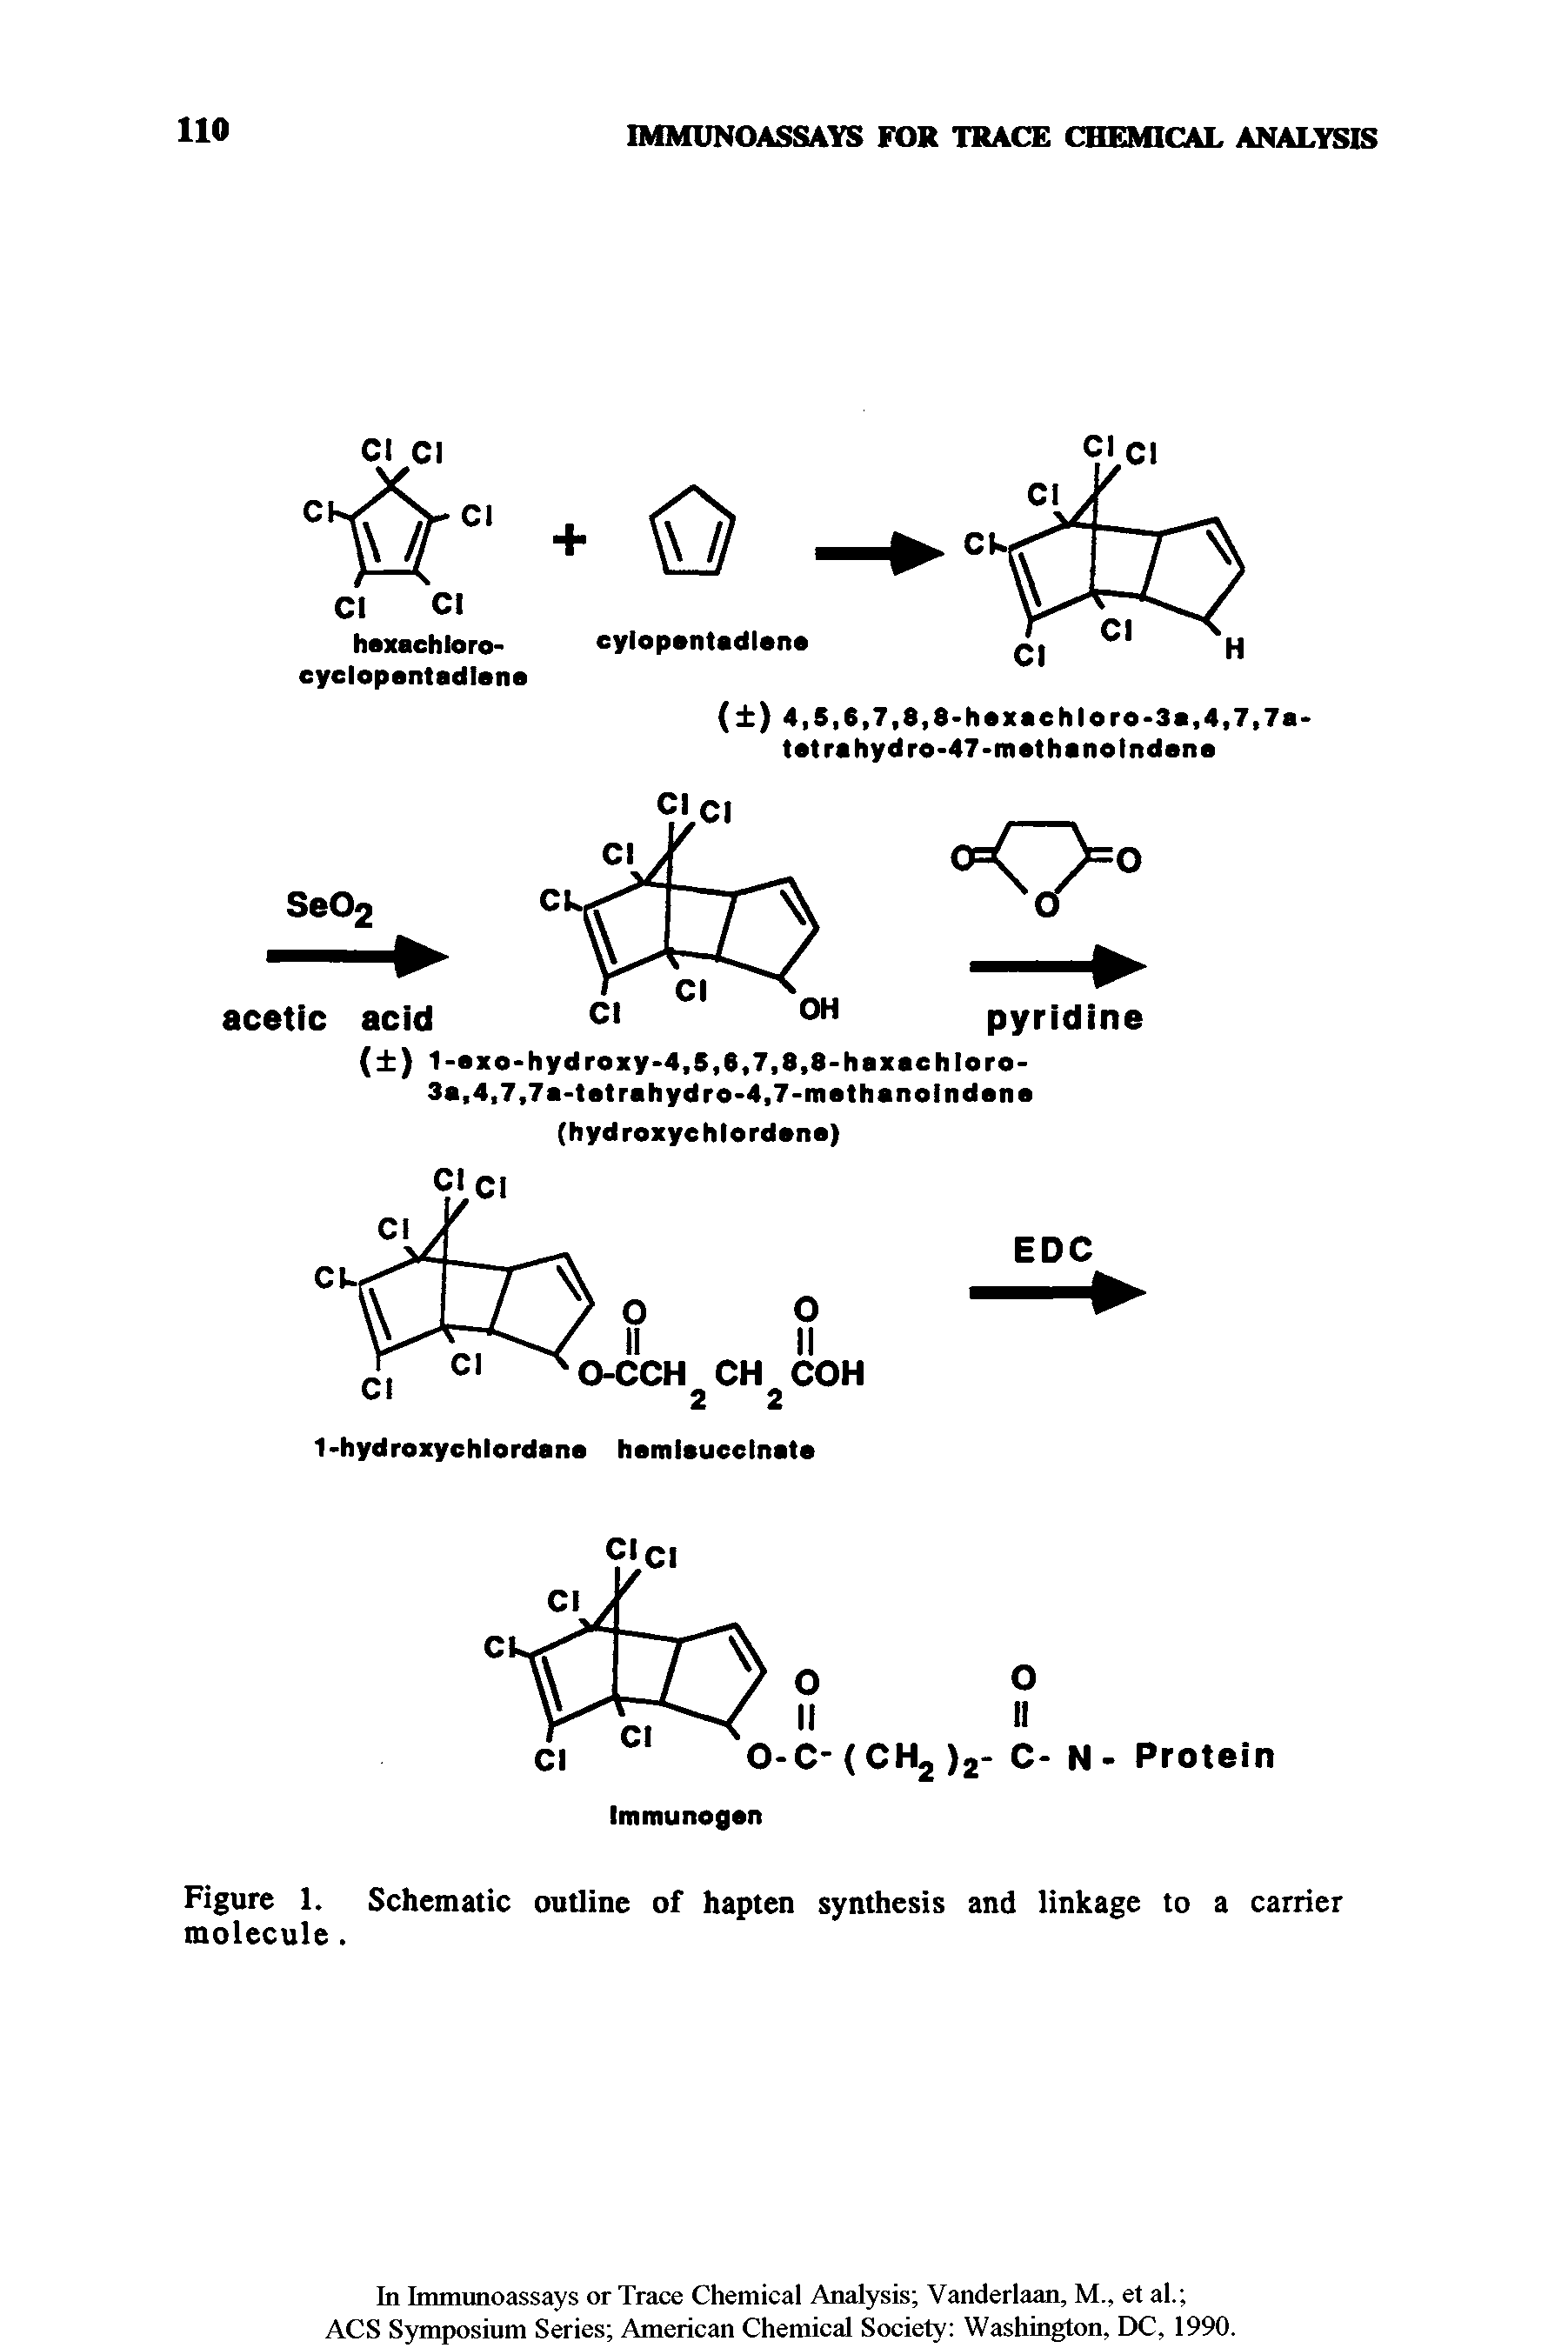 Figure 1. Schematic outline of hapten synthesis and linkage to a carrier molecule.